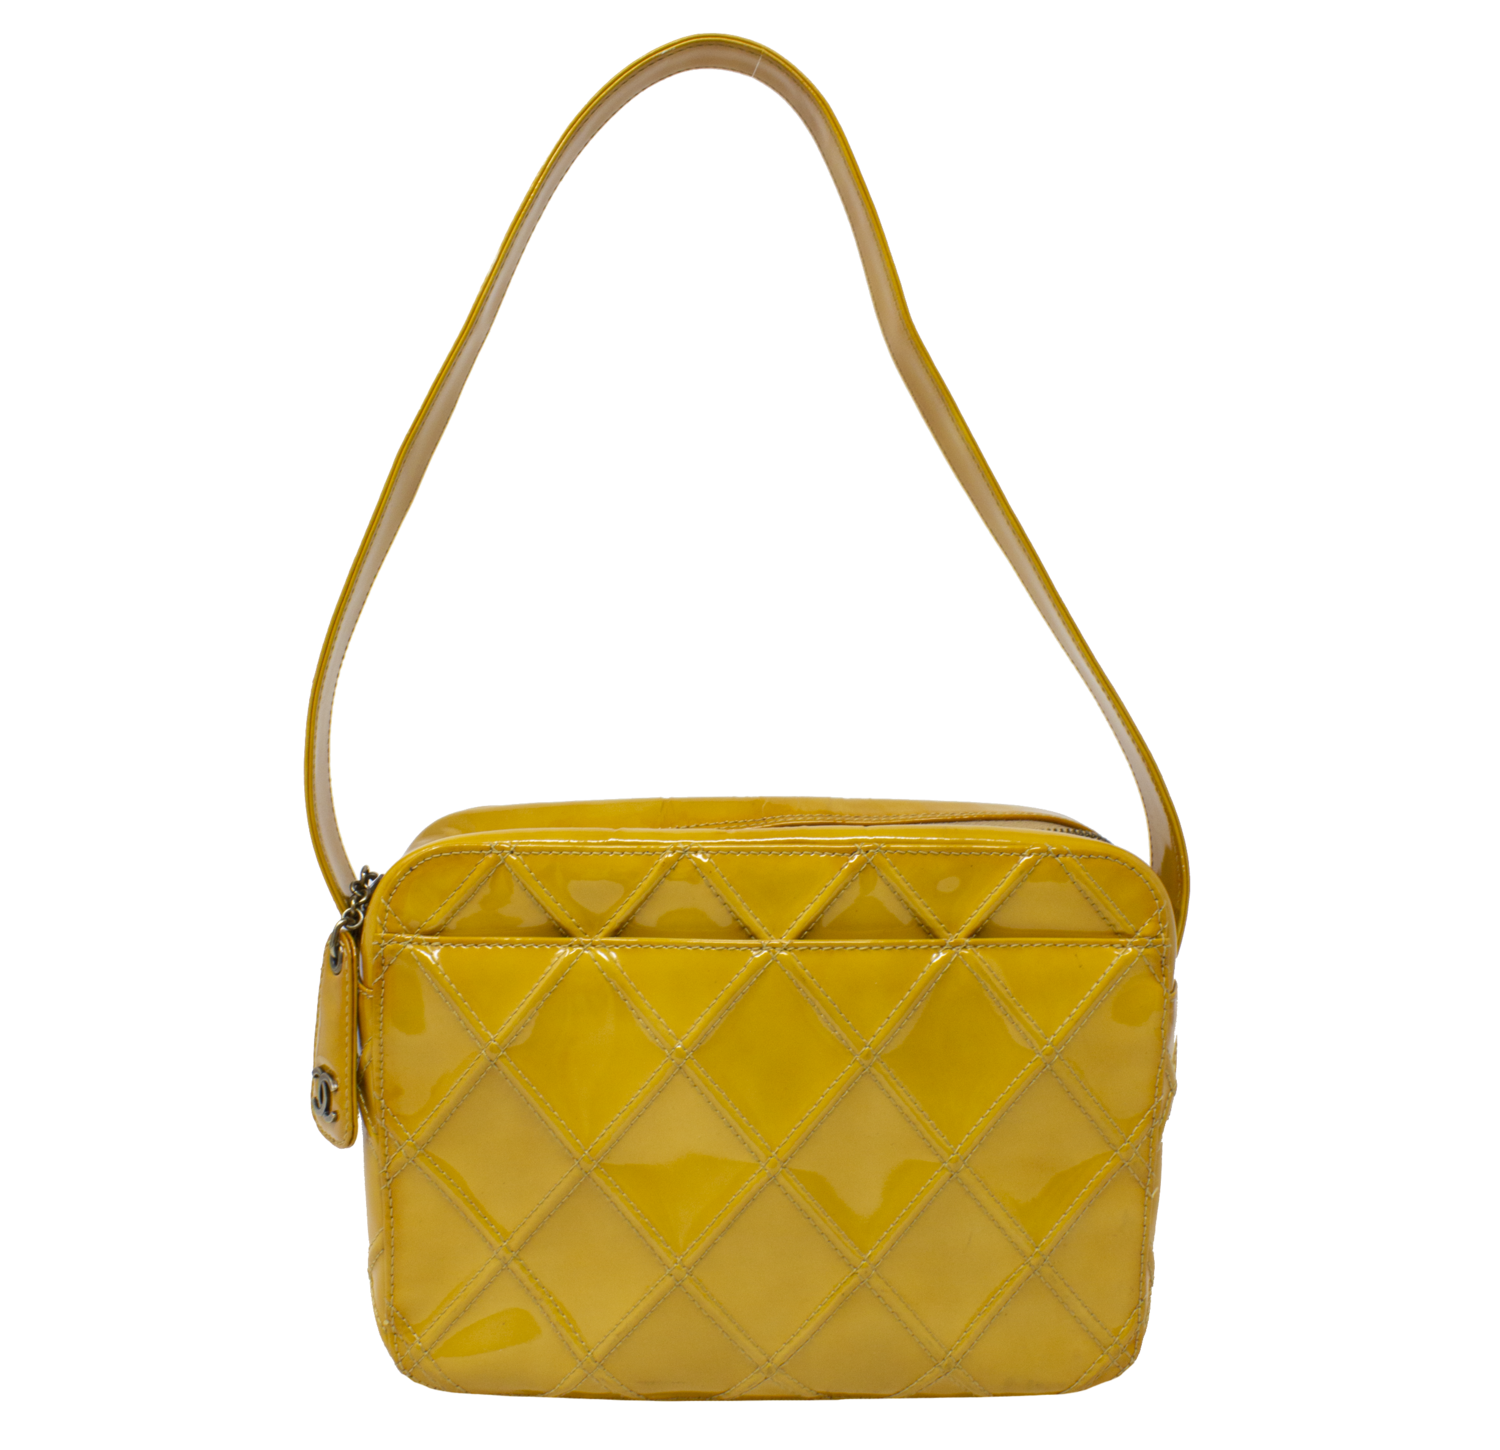 Chanel Yellow Quilted Patent Bag